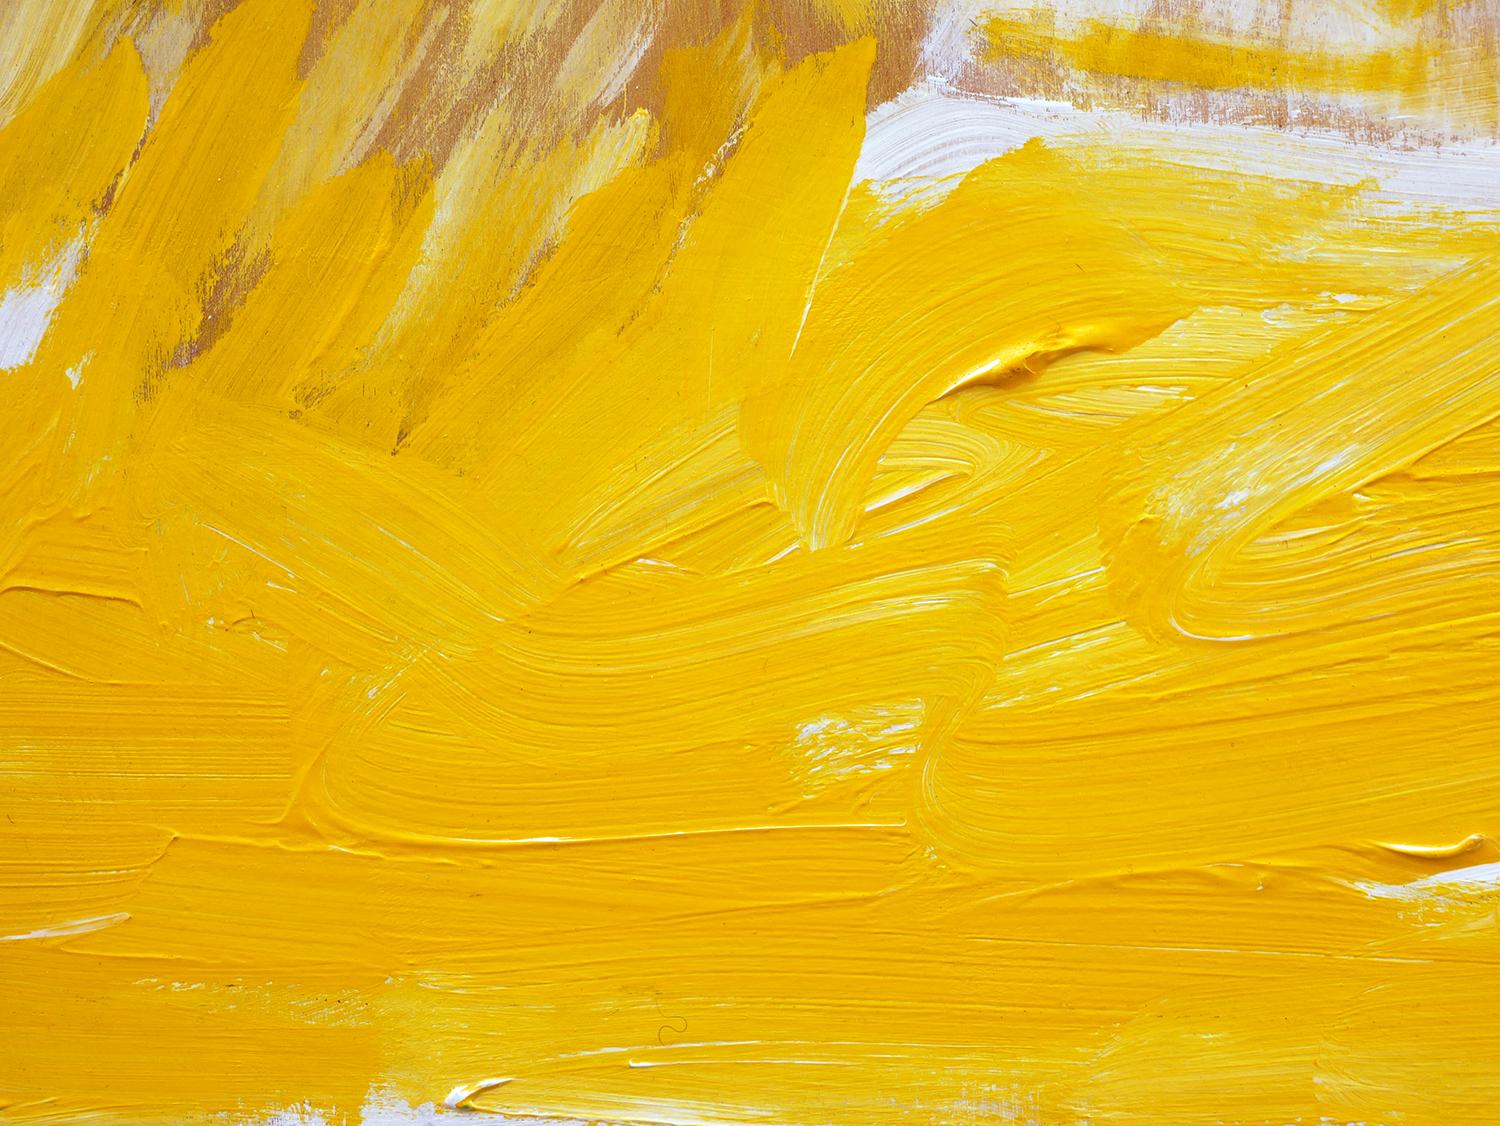 Orange and Yellow-Toned Abstract Figurative Portrait of a Blonde Woman 8